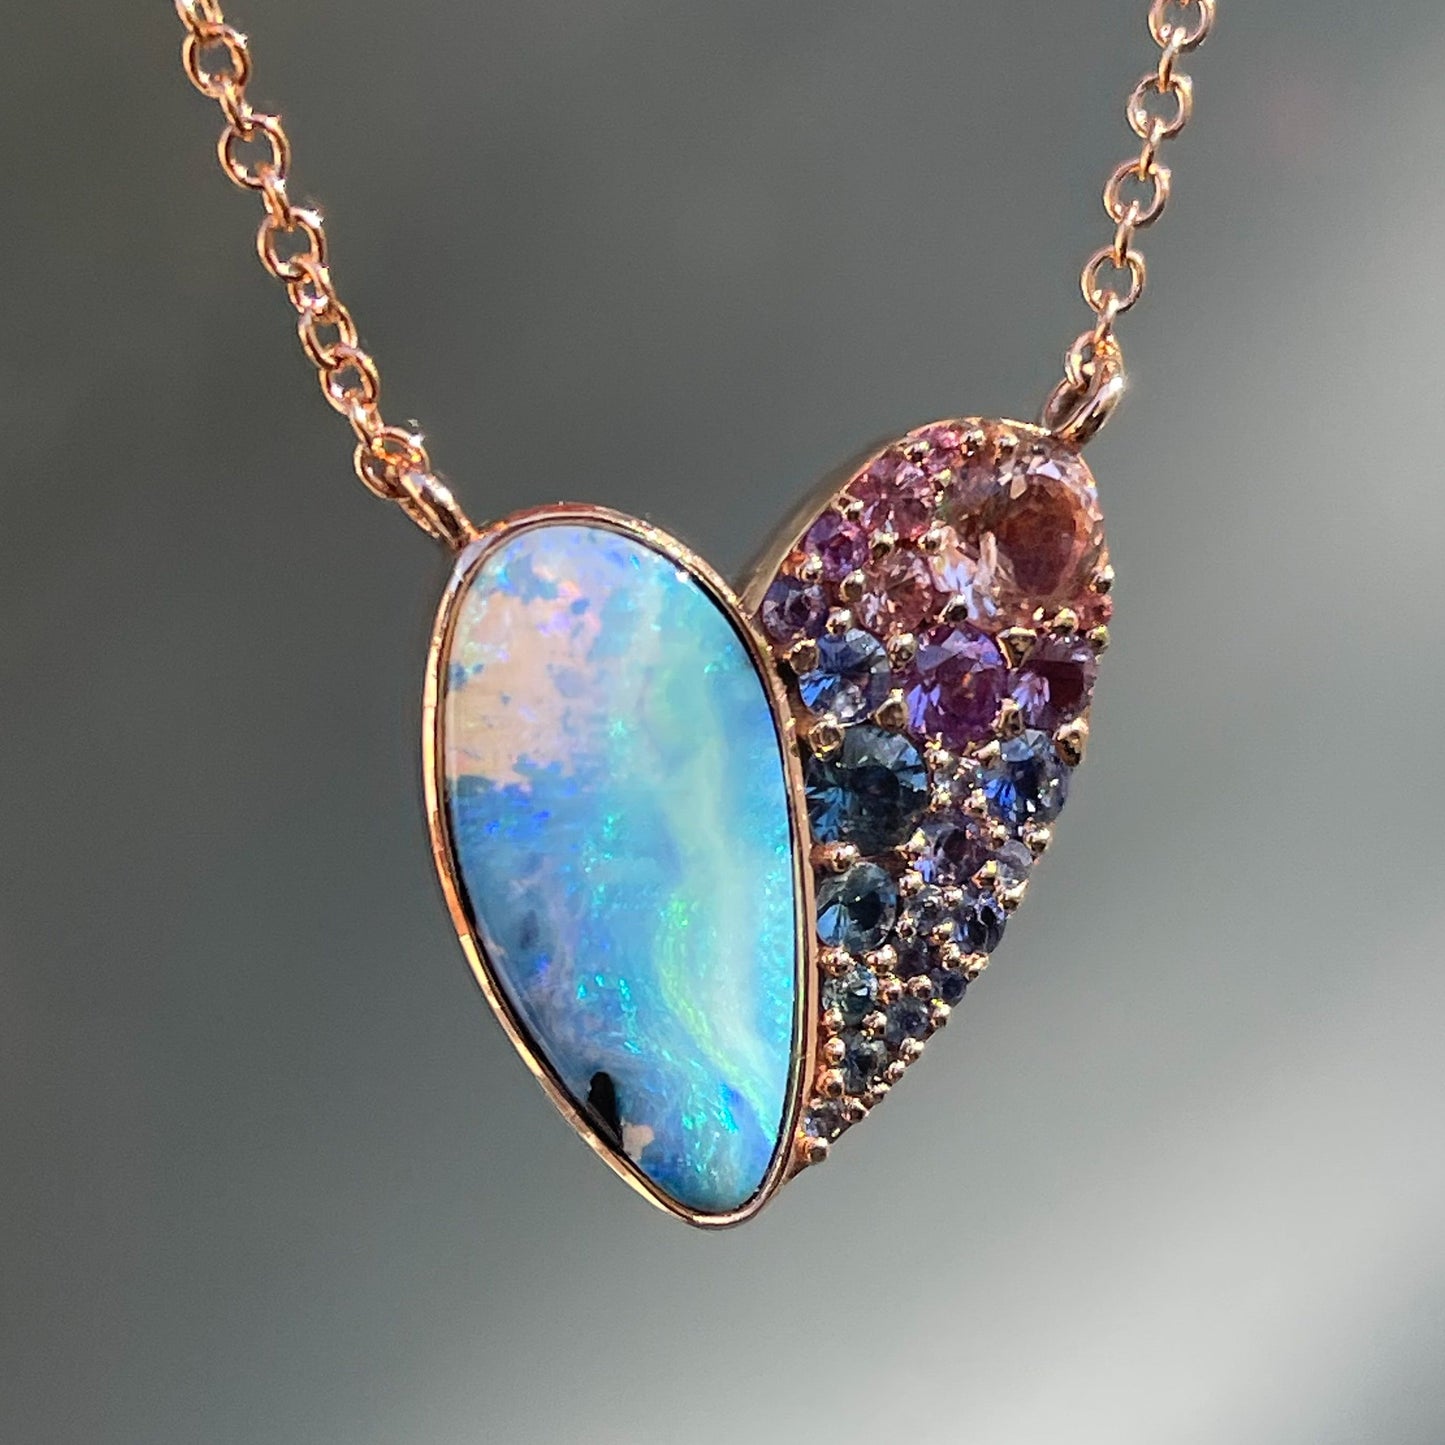 A Heart Opal Necklace by NIXIN Jewelry with a blue opal and multicolored sapphires in 14k rose gold.